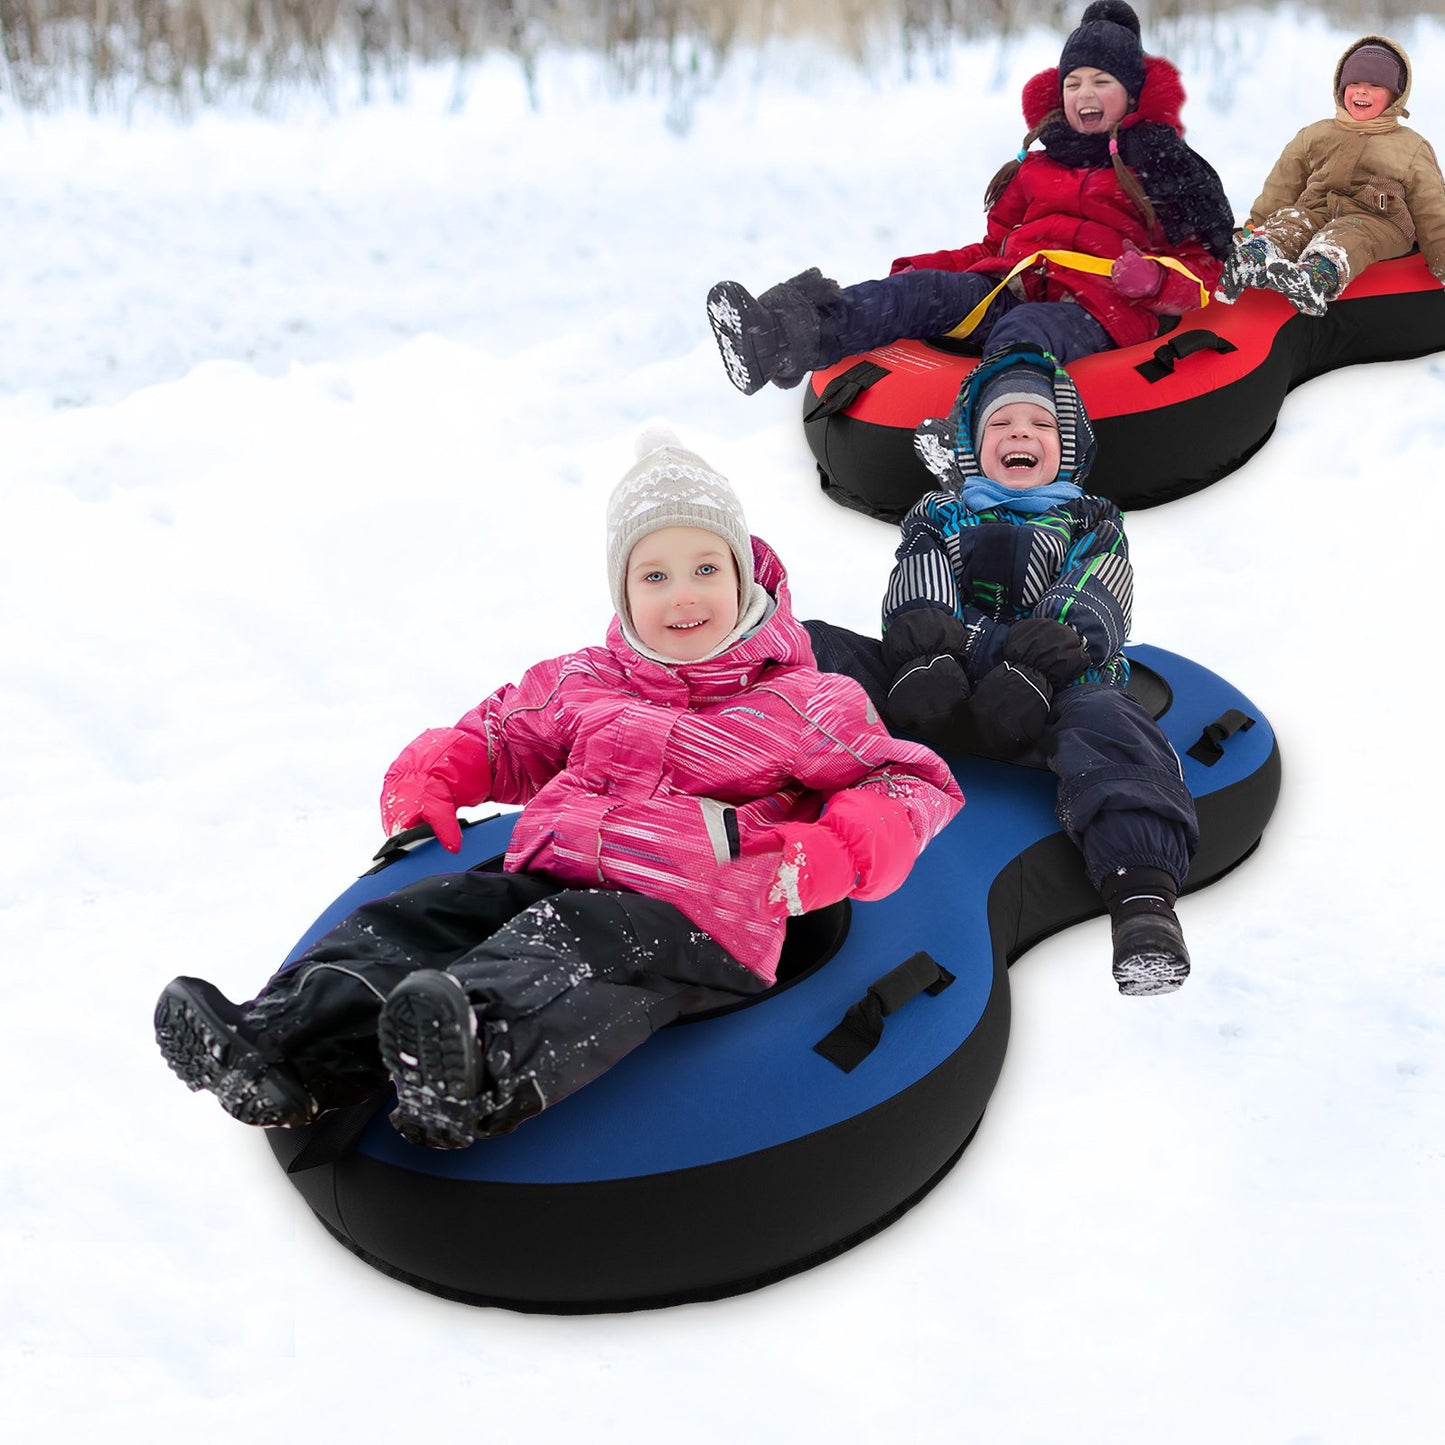 80" 2-Person Inflatable Snow Sled for Kids and Adults, Blue